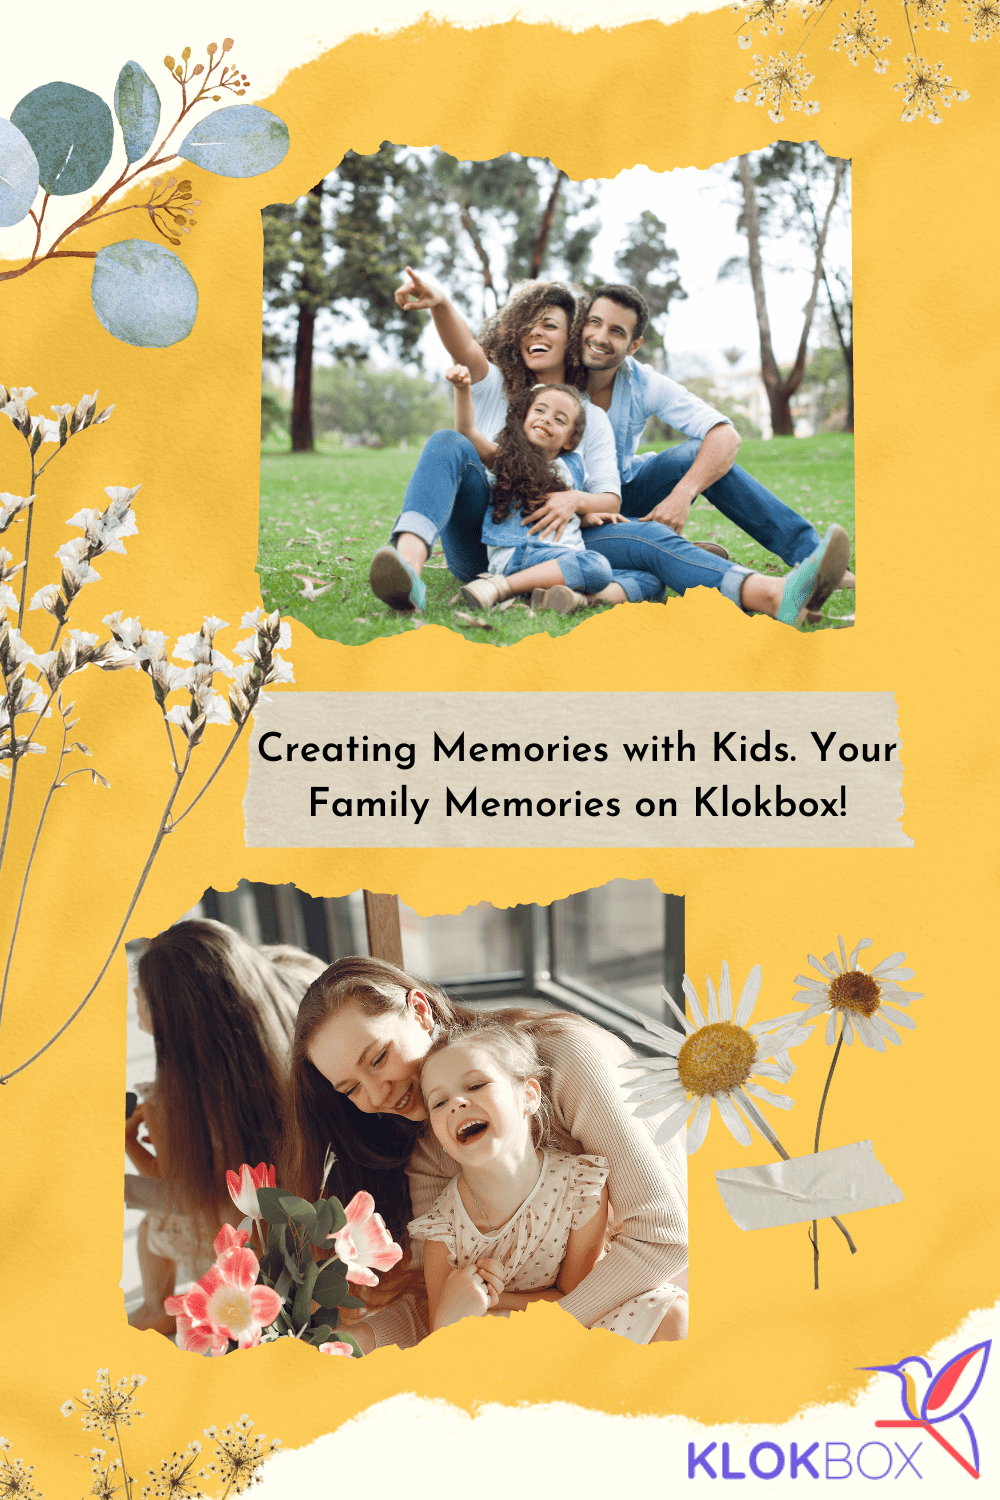 Klokbox: A Time Capsule for Your Family Memories